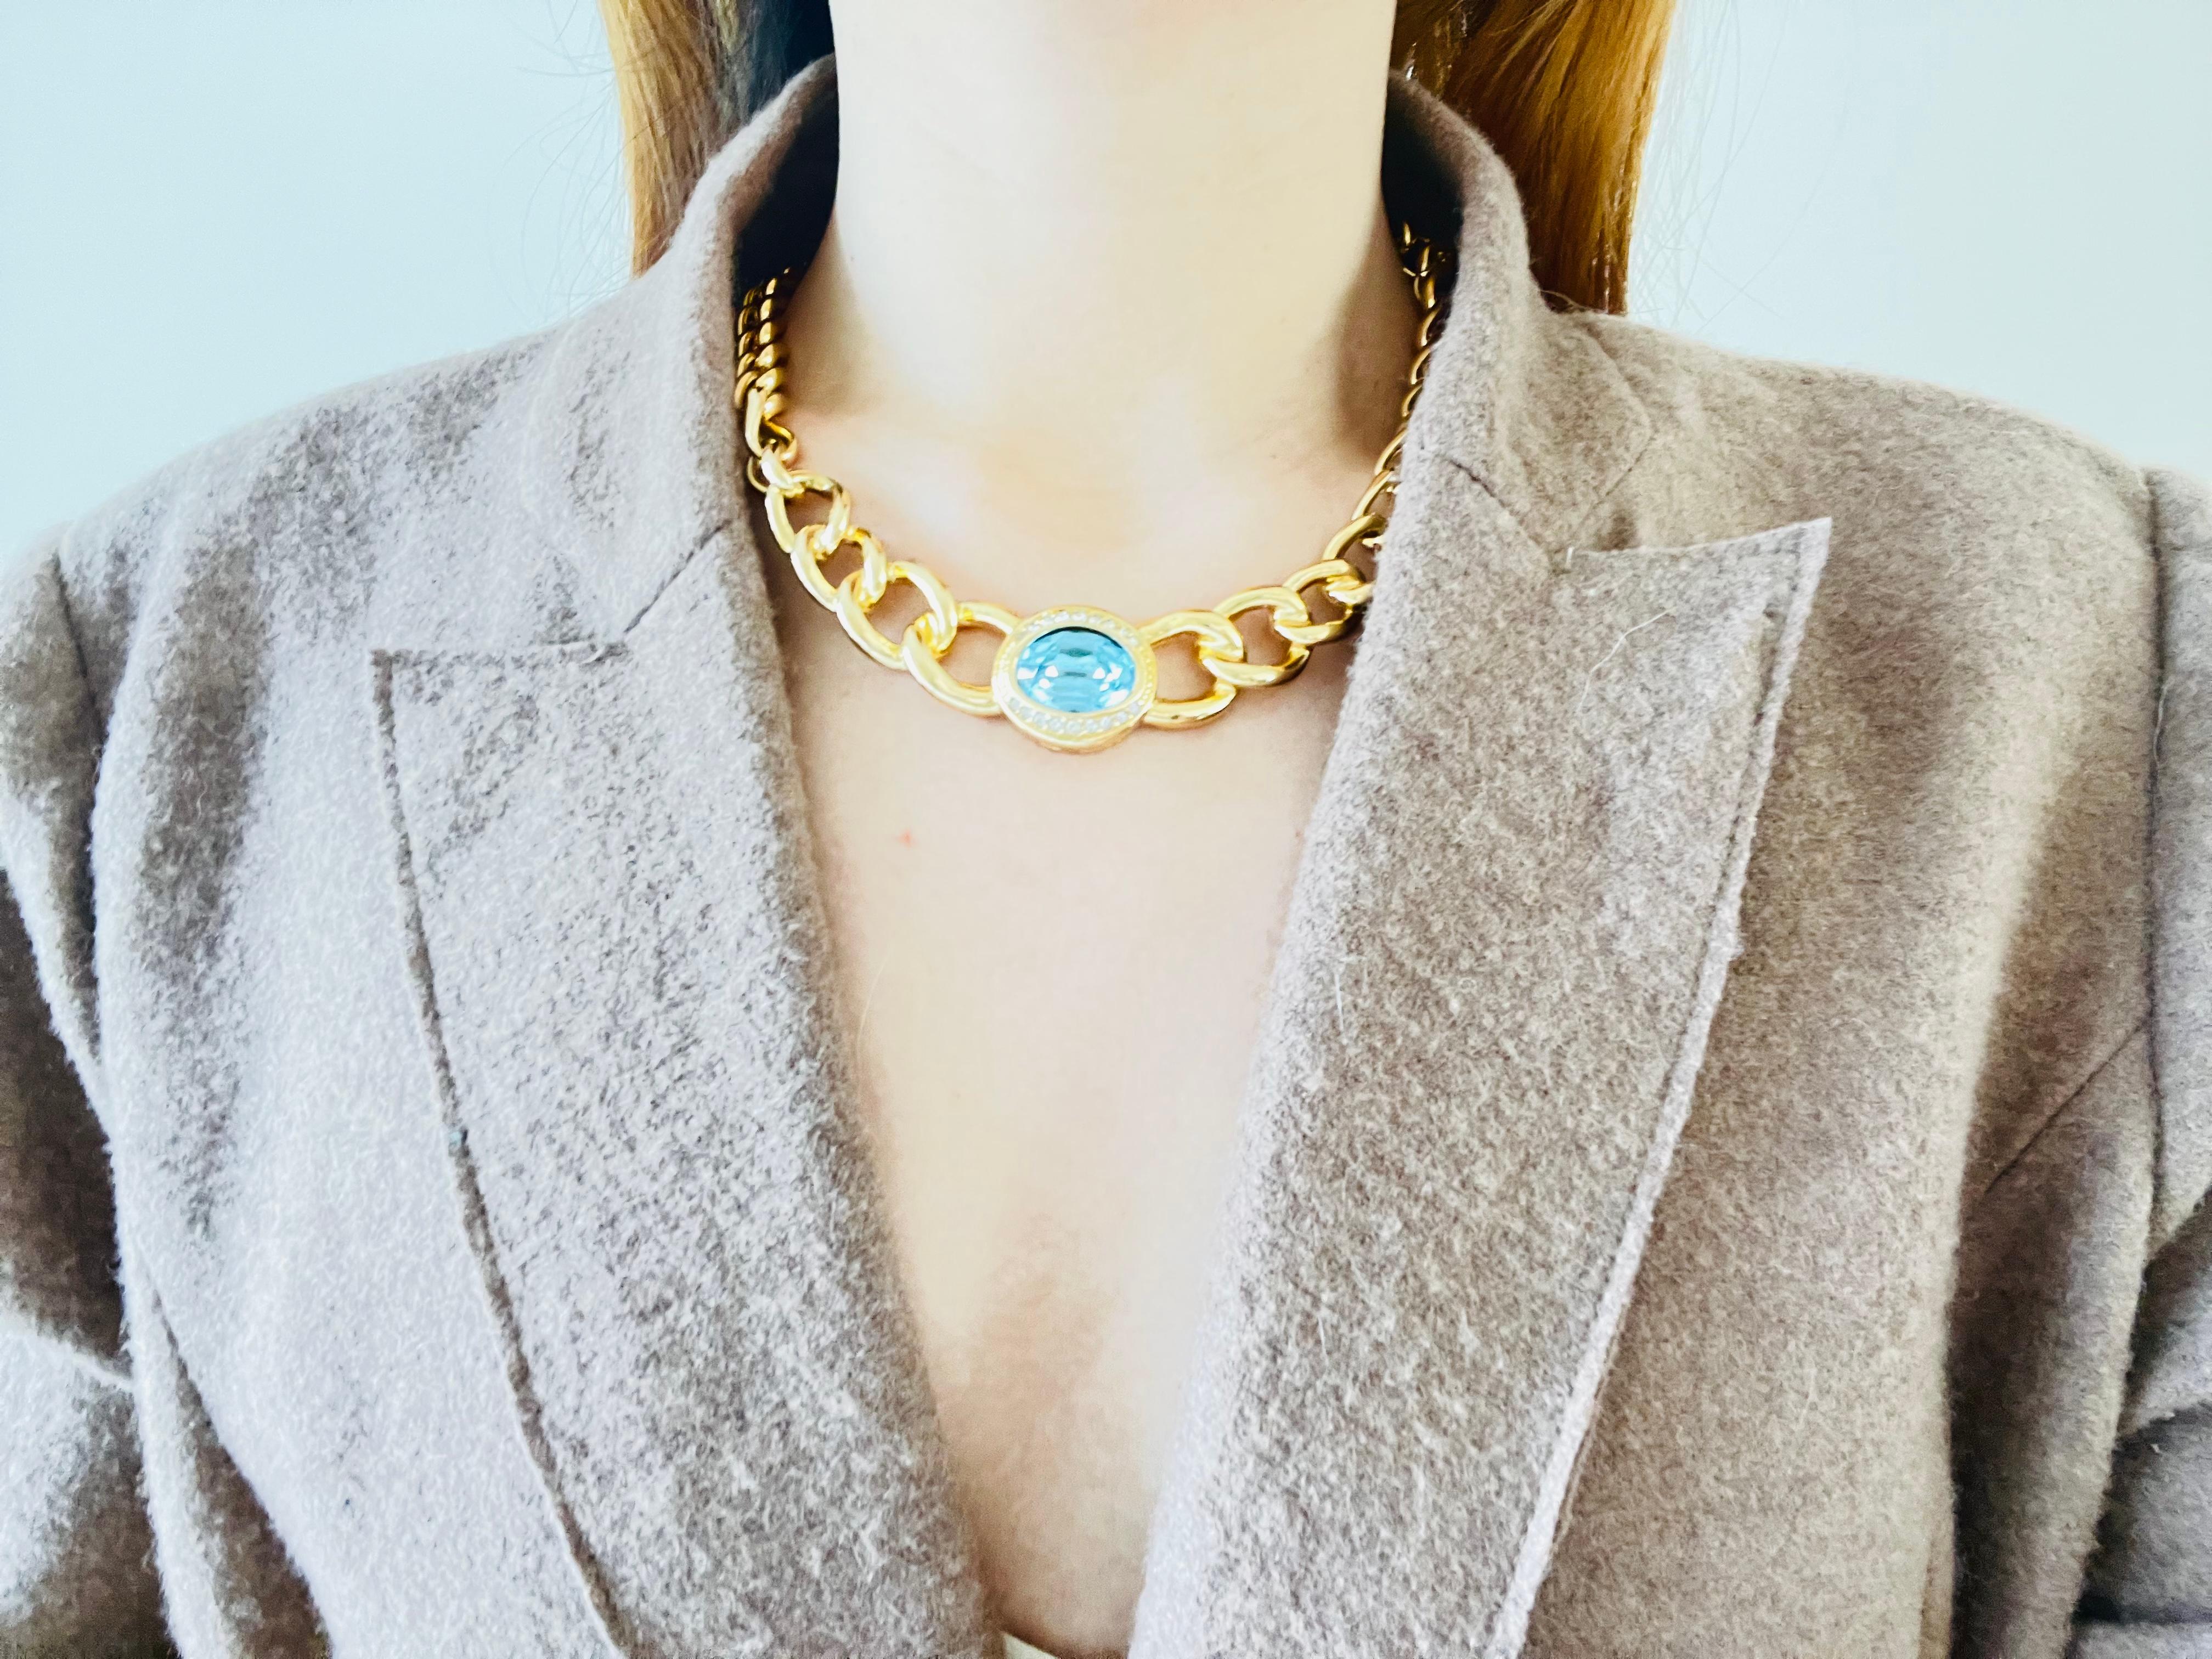 Christian Dior Vintage 1990s Aqua Blue Oval Crystal Chunky Gold Choker Necklace  In Excellent Condition For Sale In Wokingham, England